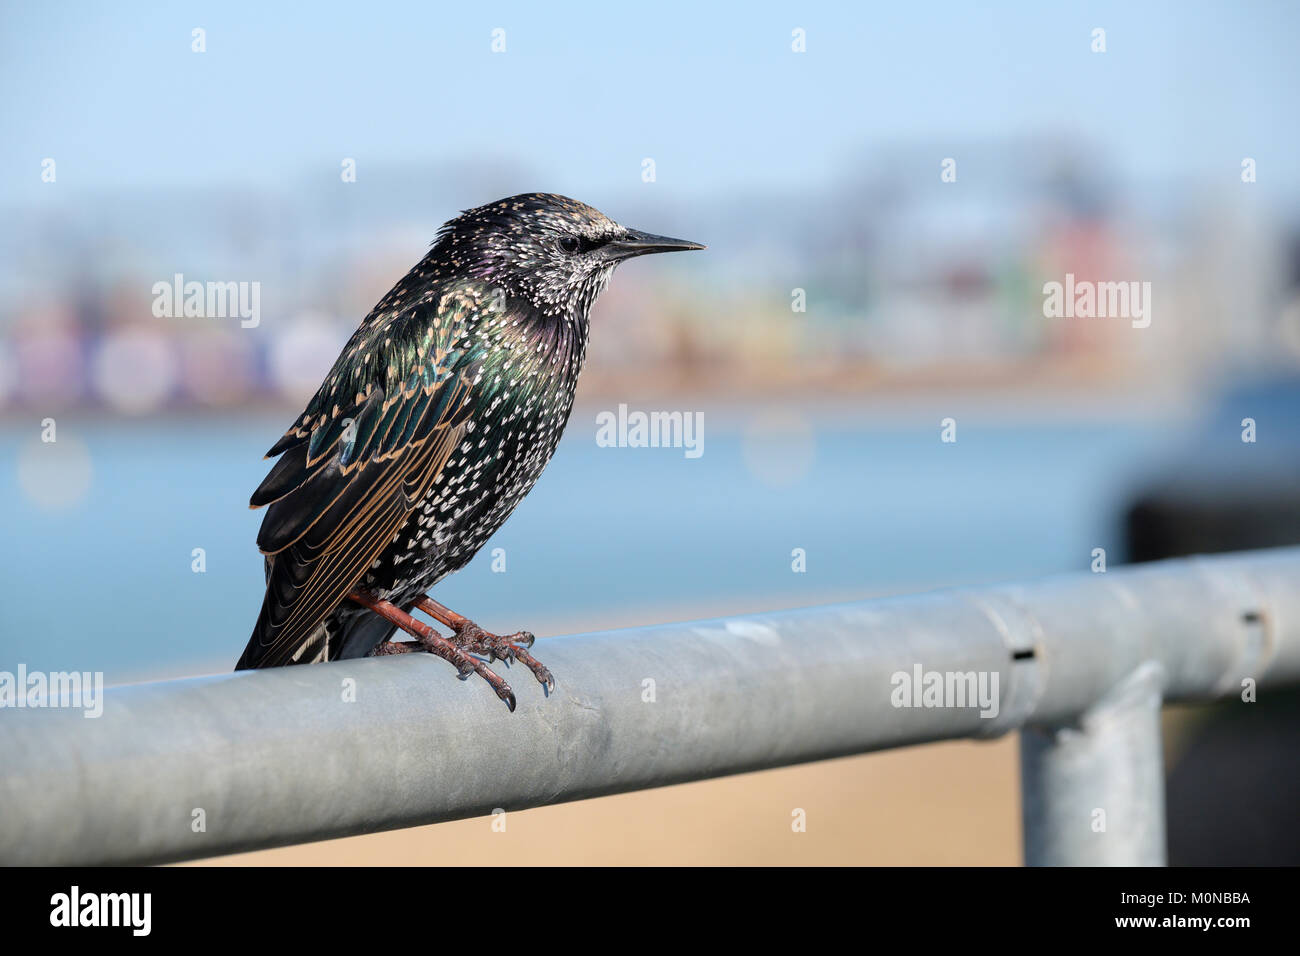 Mature common or European starling (Sturnus vulgaris) perched on a metal fence with out of focus background, Suffolk, England, UK Stock Photo